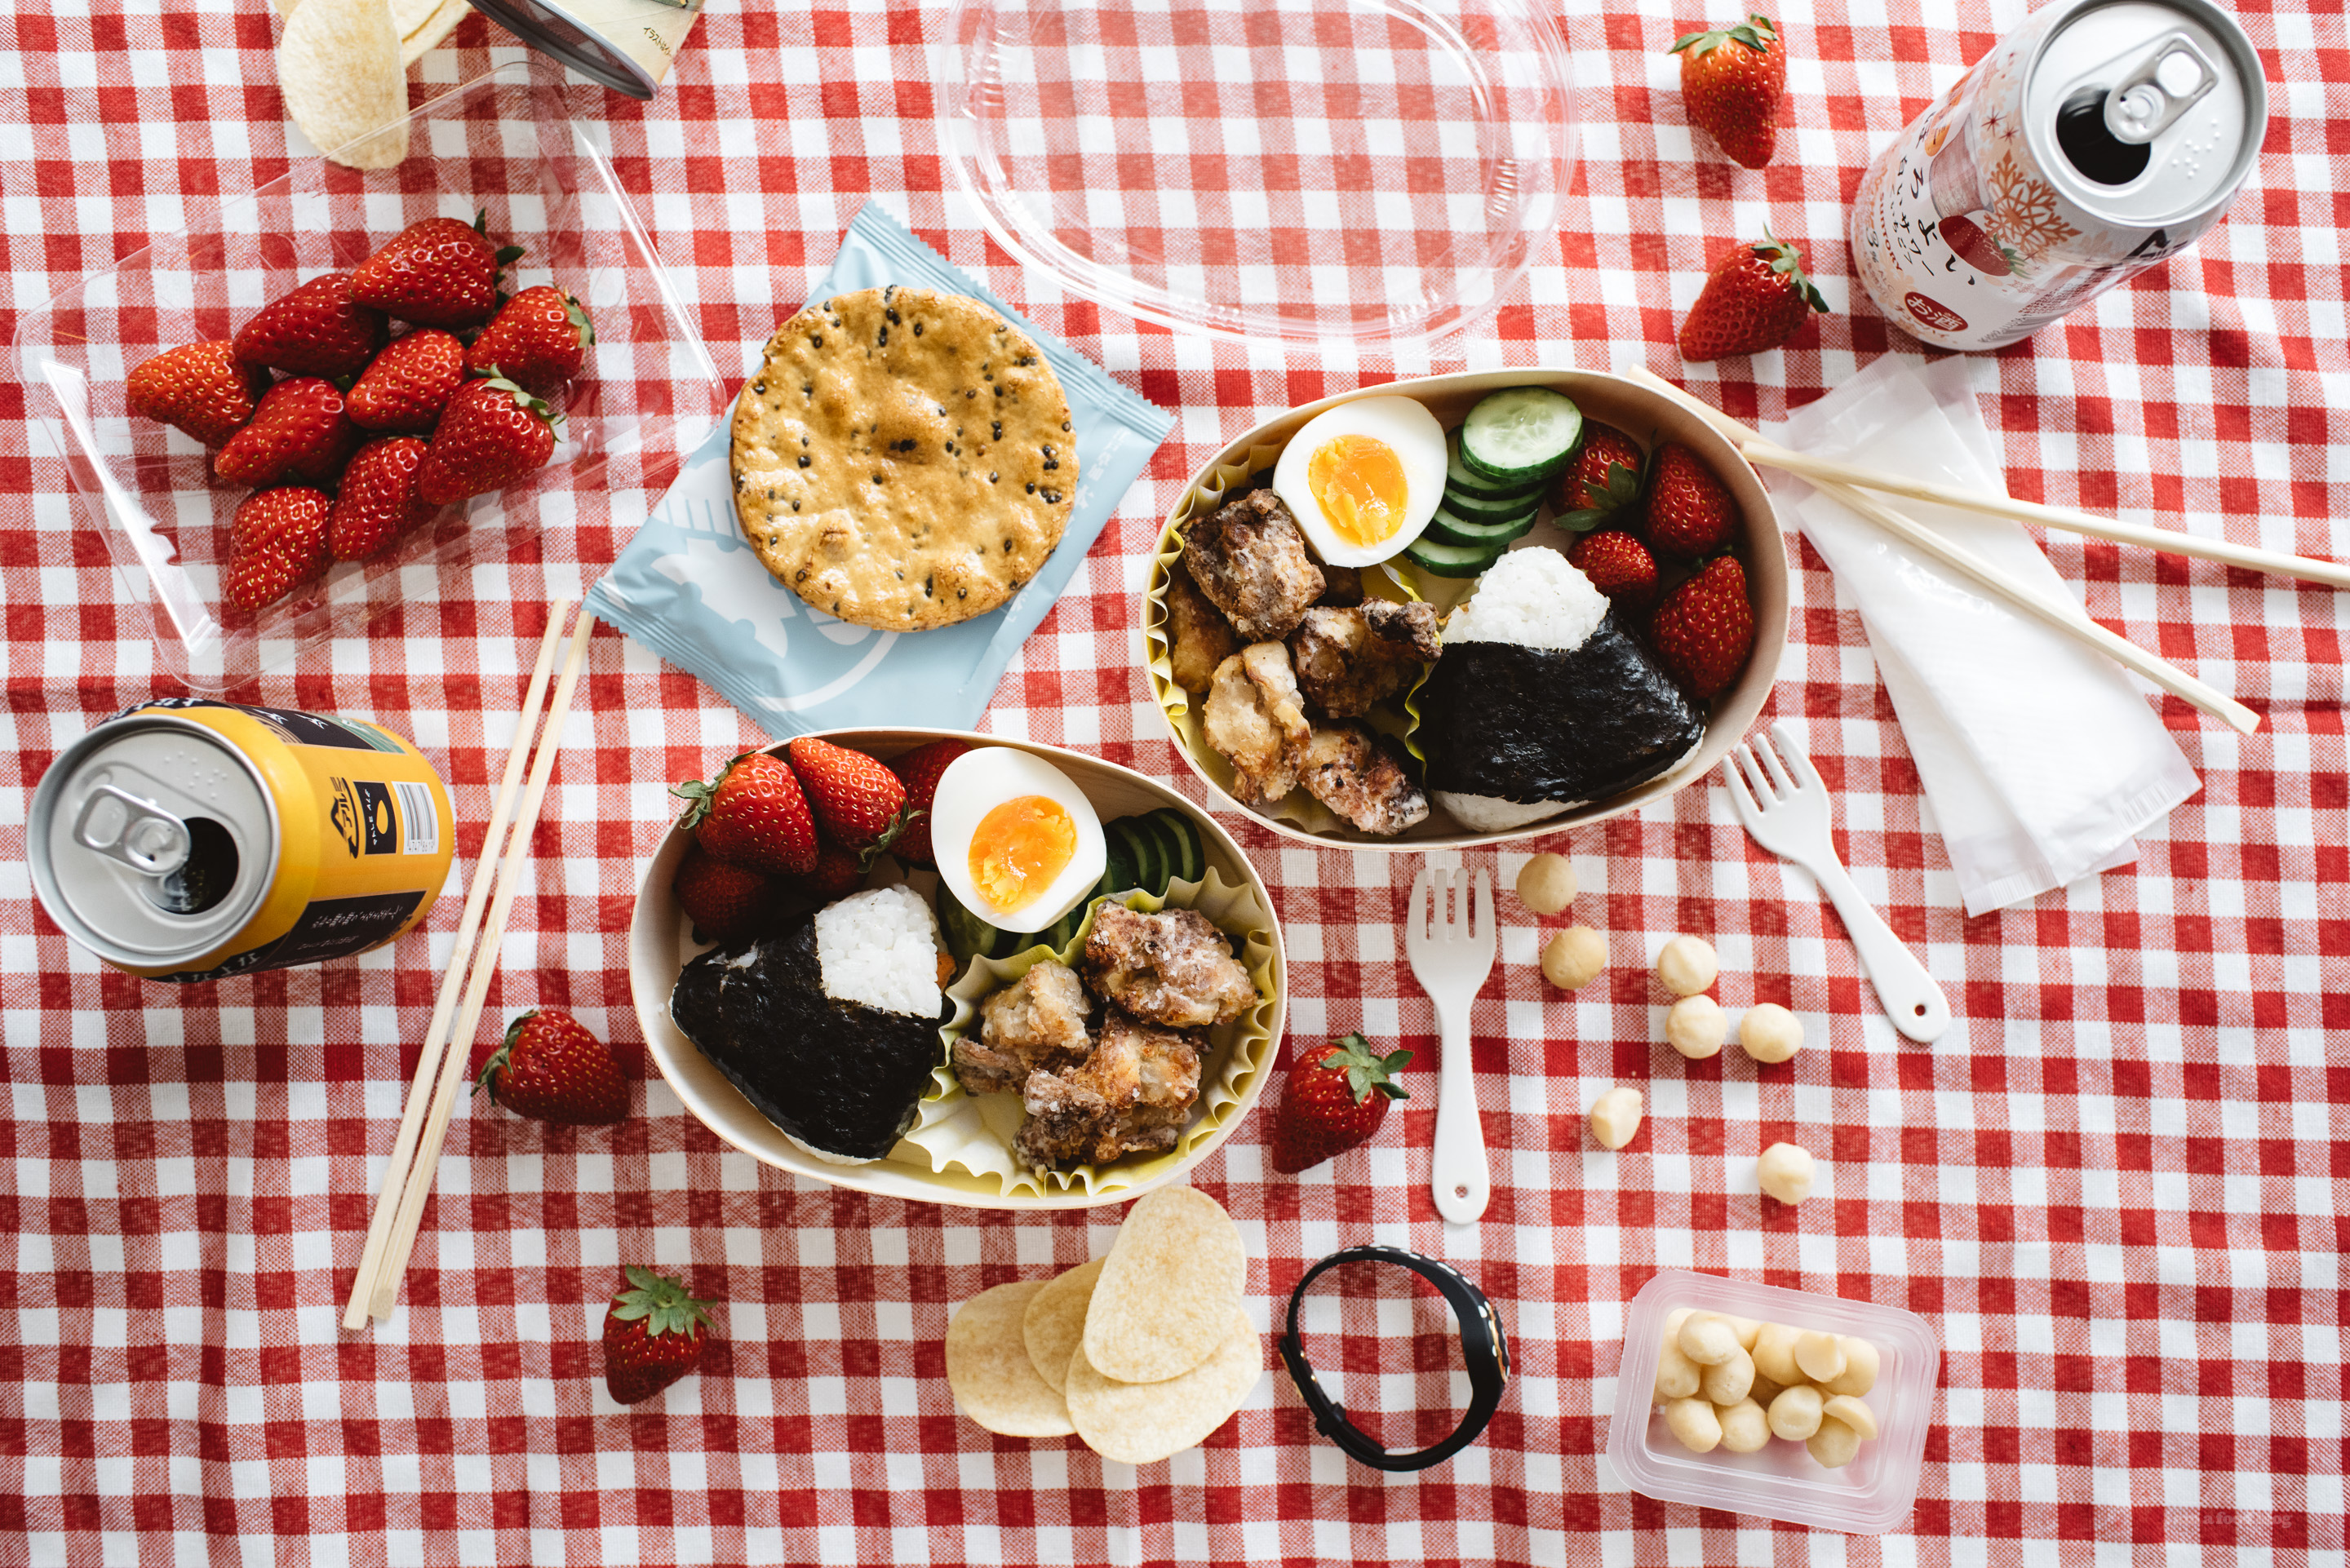 12 Things to Make and Take on a Japanese-Inspired Picnic!